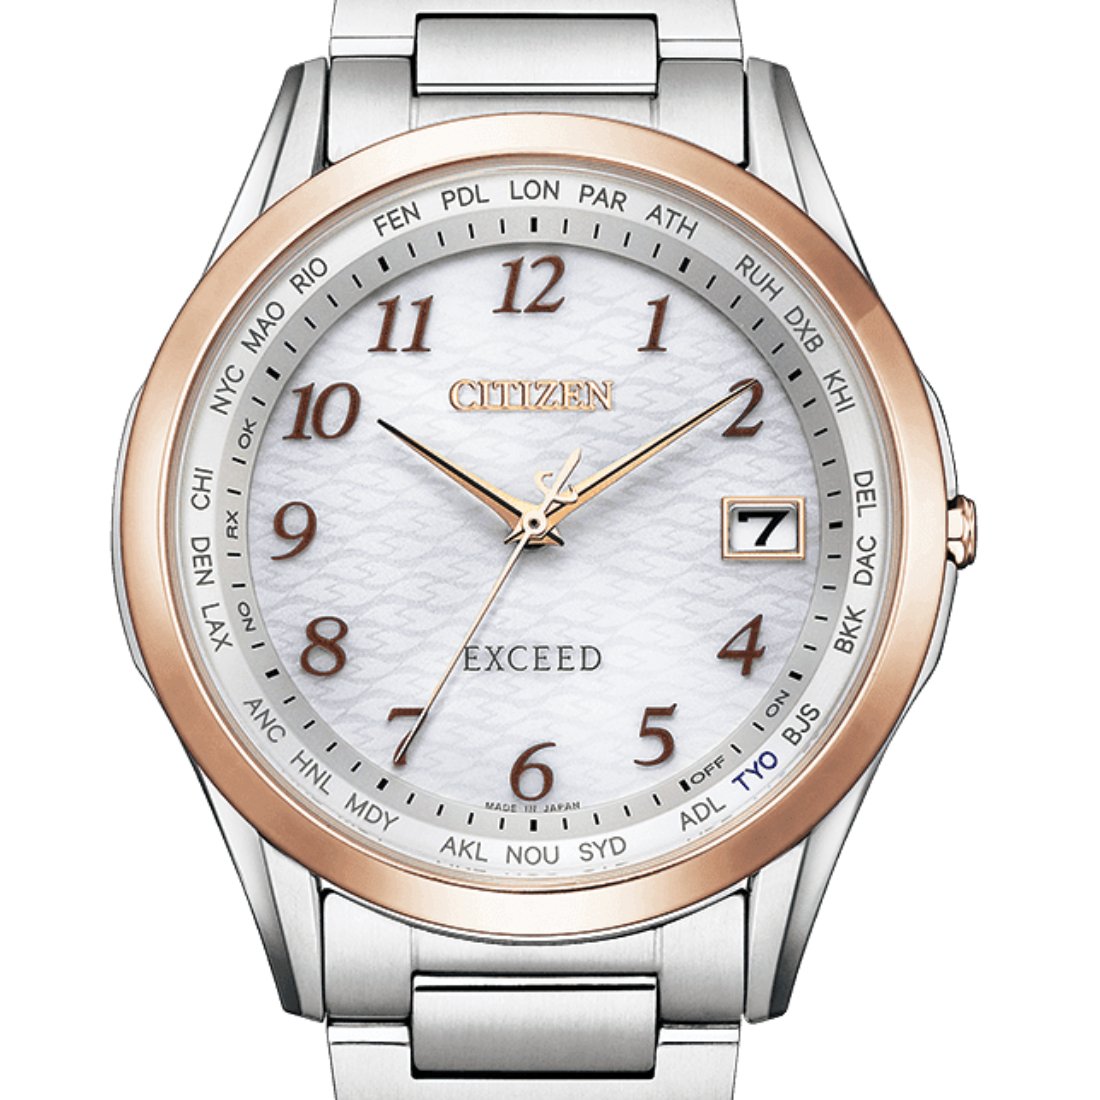 Citizen CB1115-50A Exceed Limited Edition Eco-Drive Mens Watch -Citizen